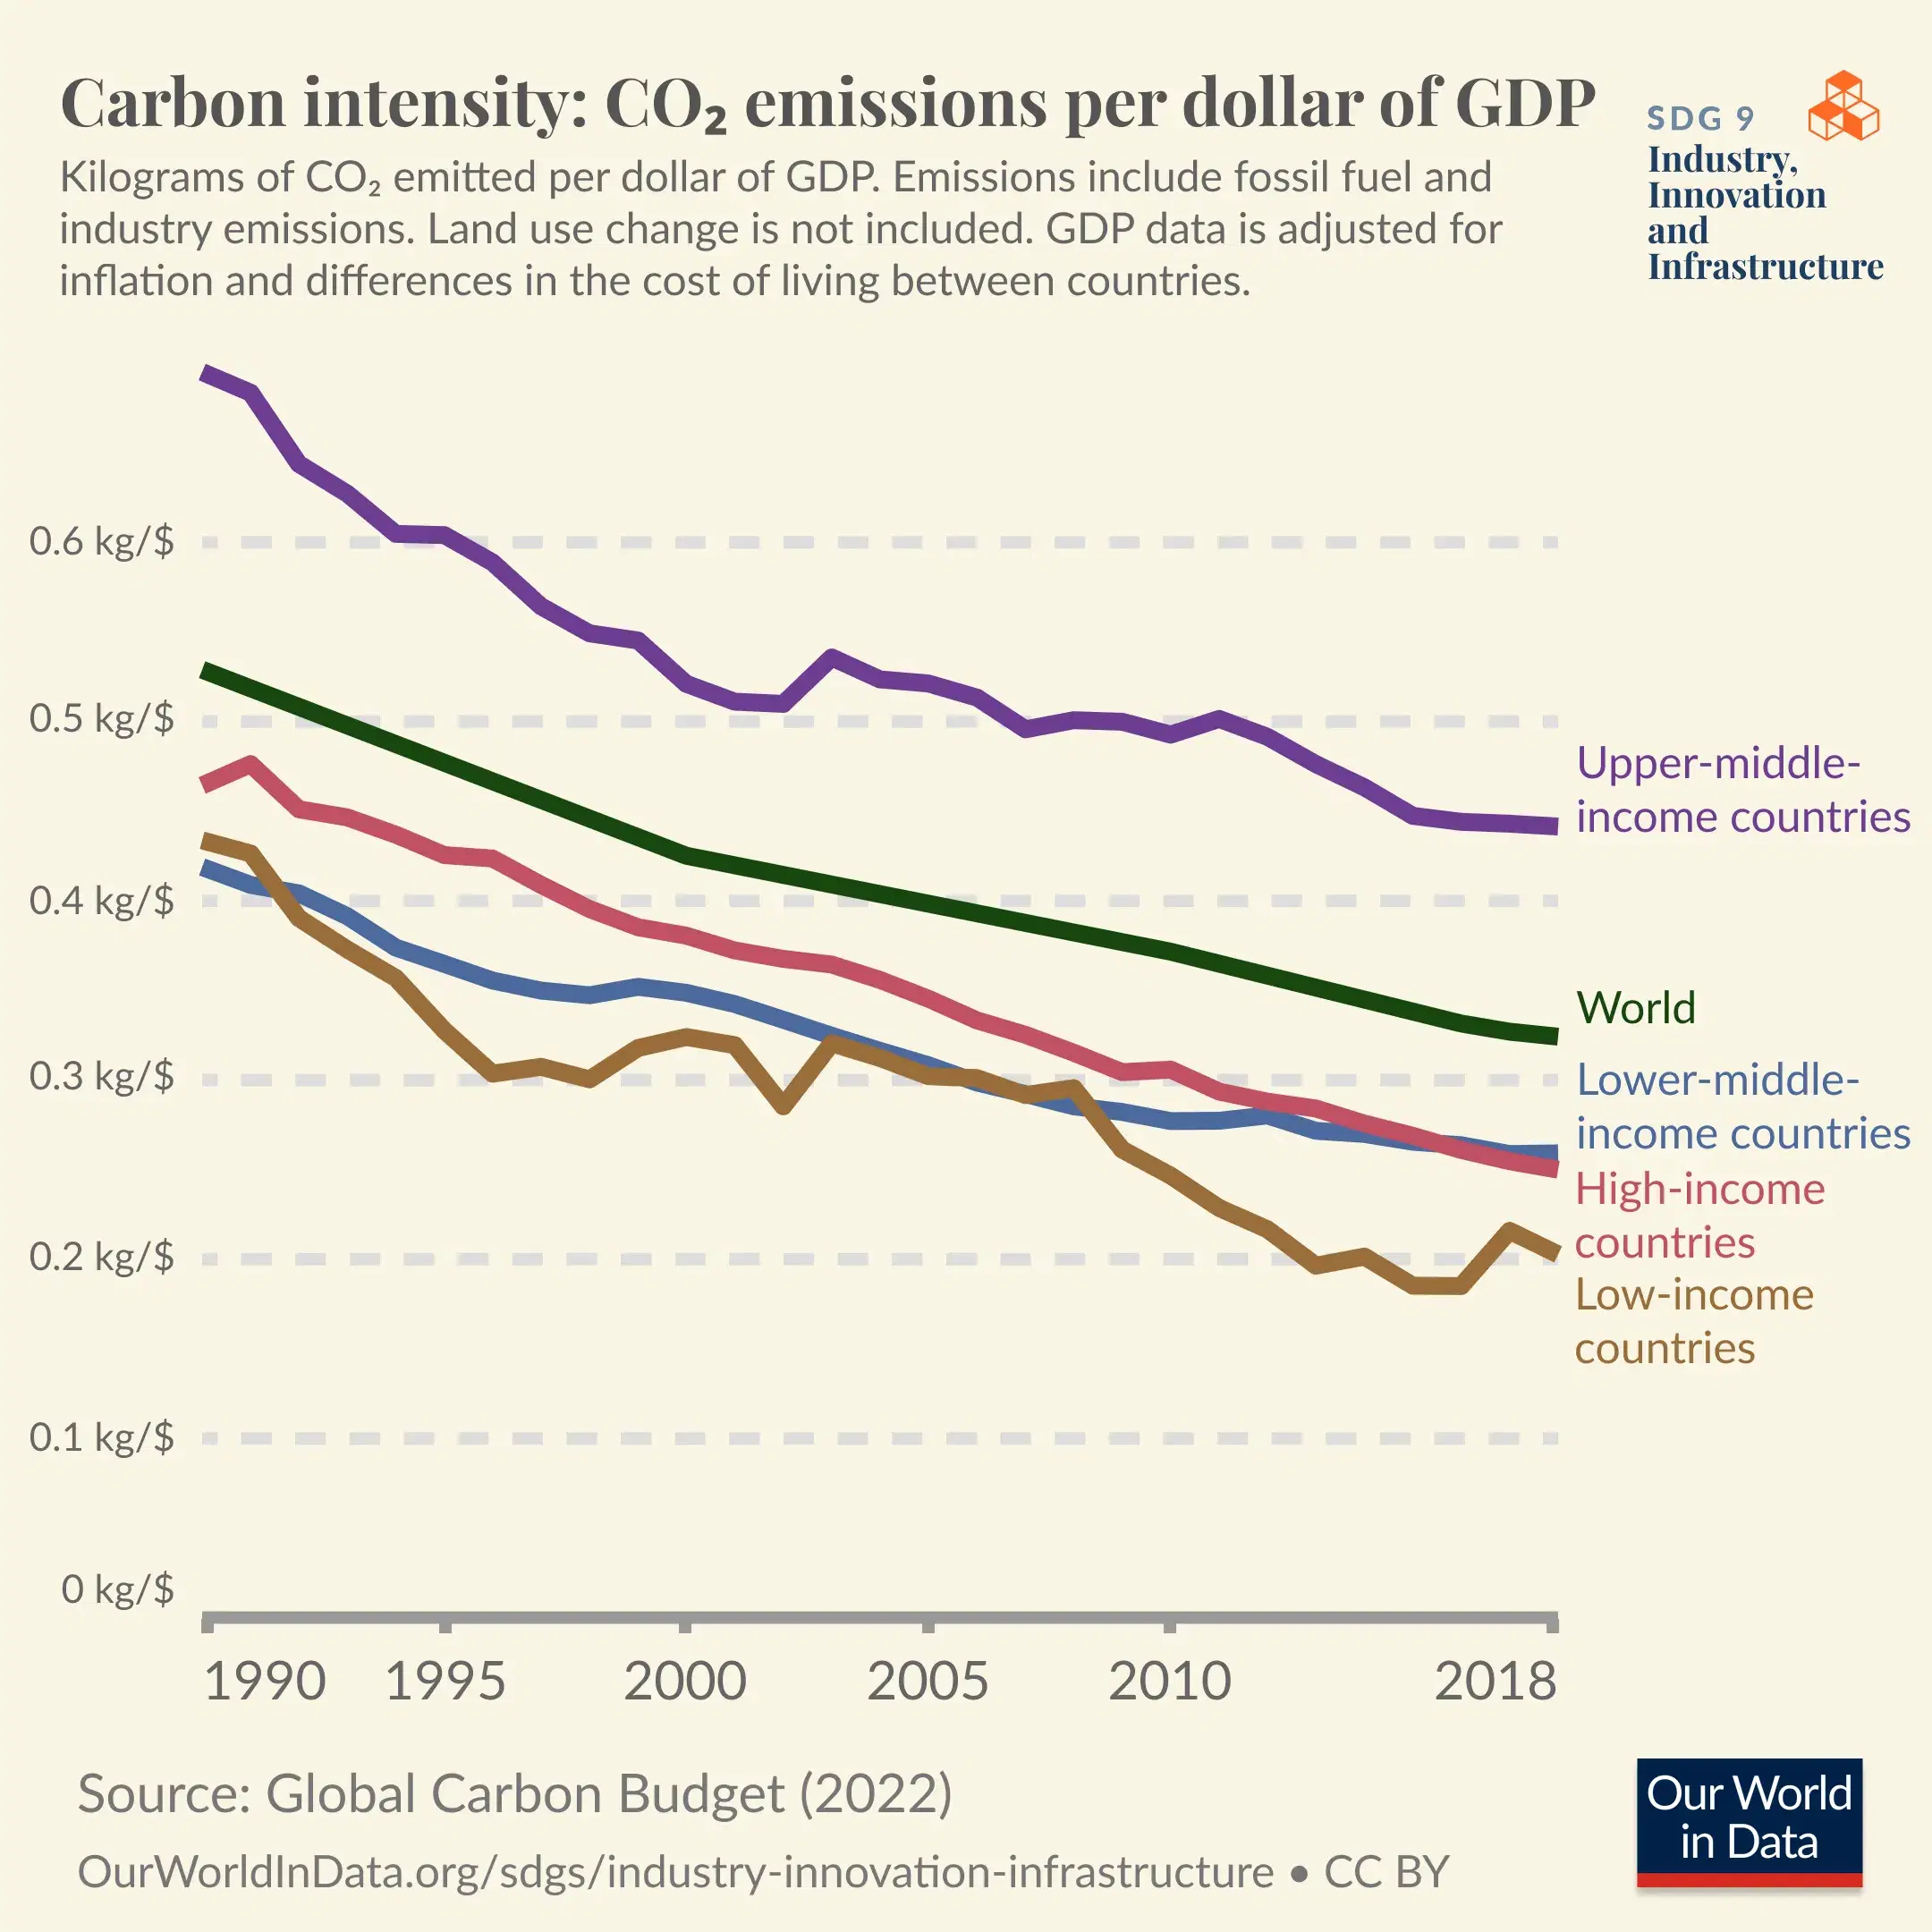 Carbon Intensity: CO2 Emissions per Dollar of GDP